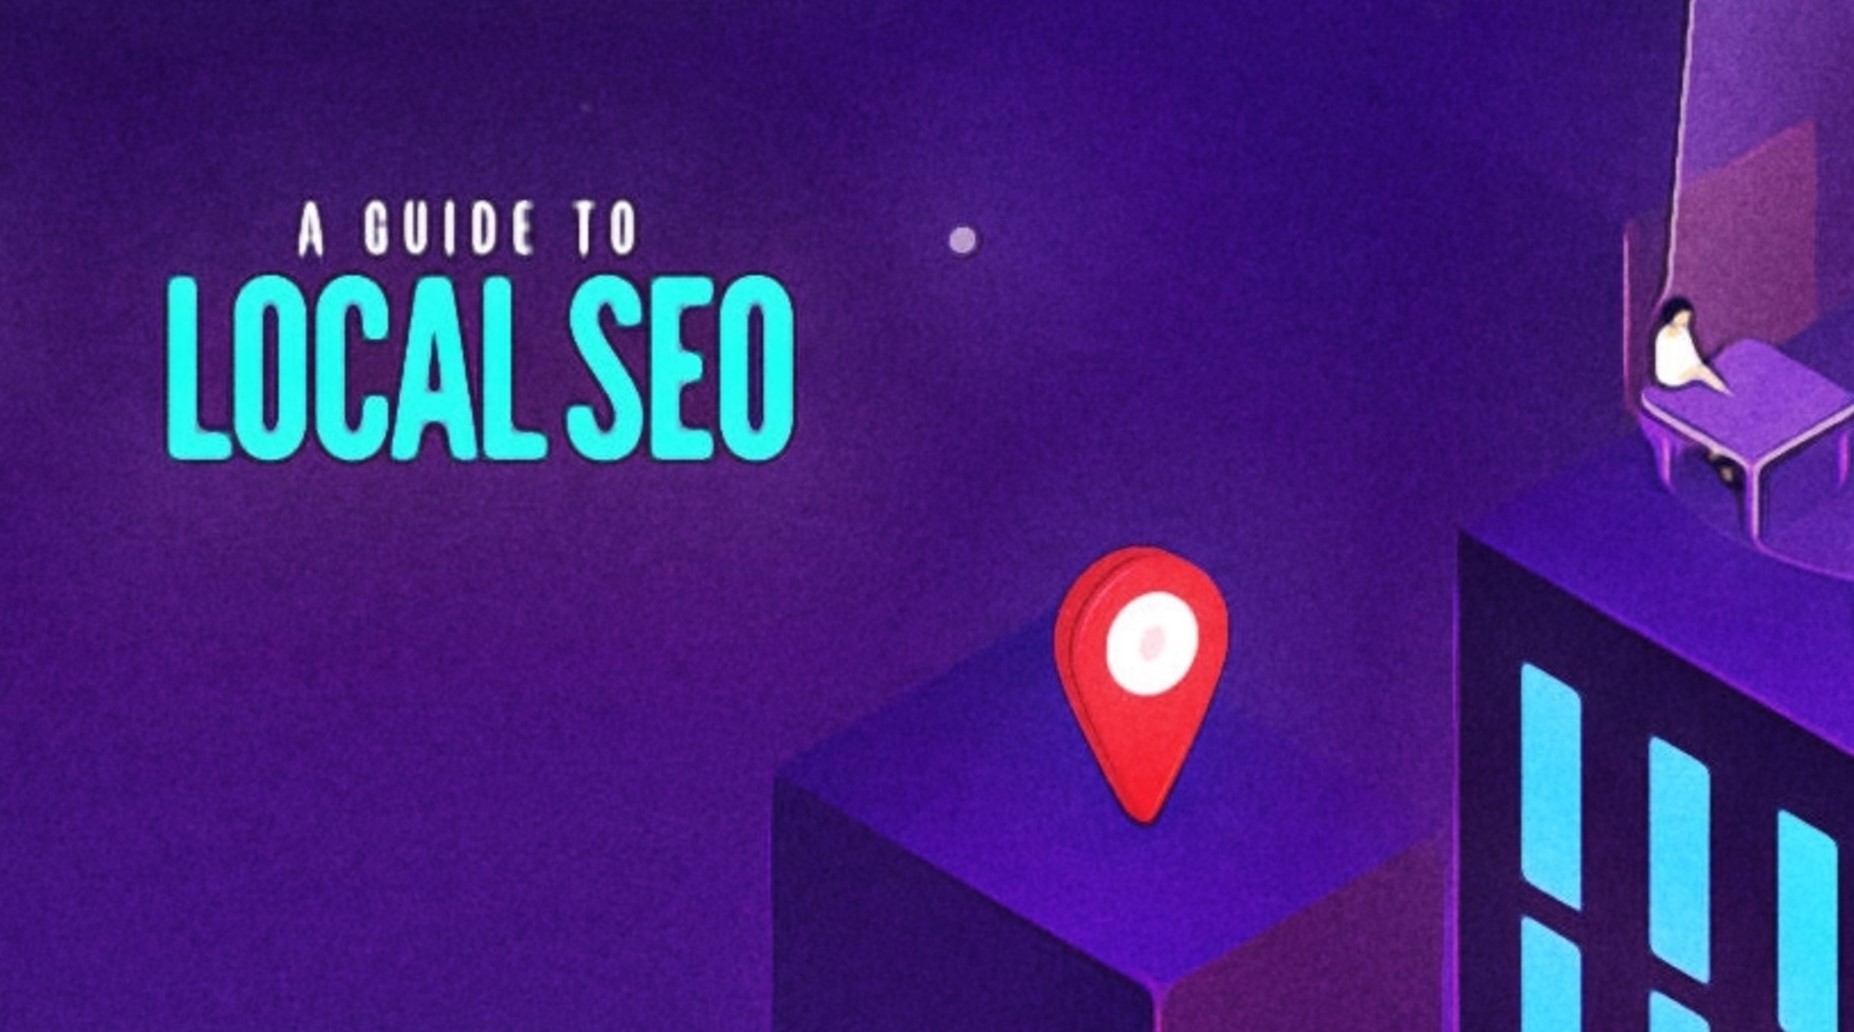 It is possible to get support from local-seo.com.au